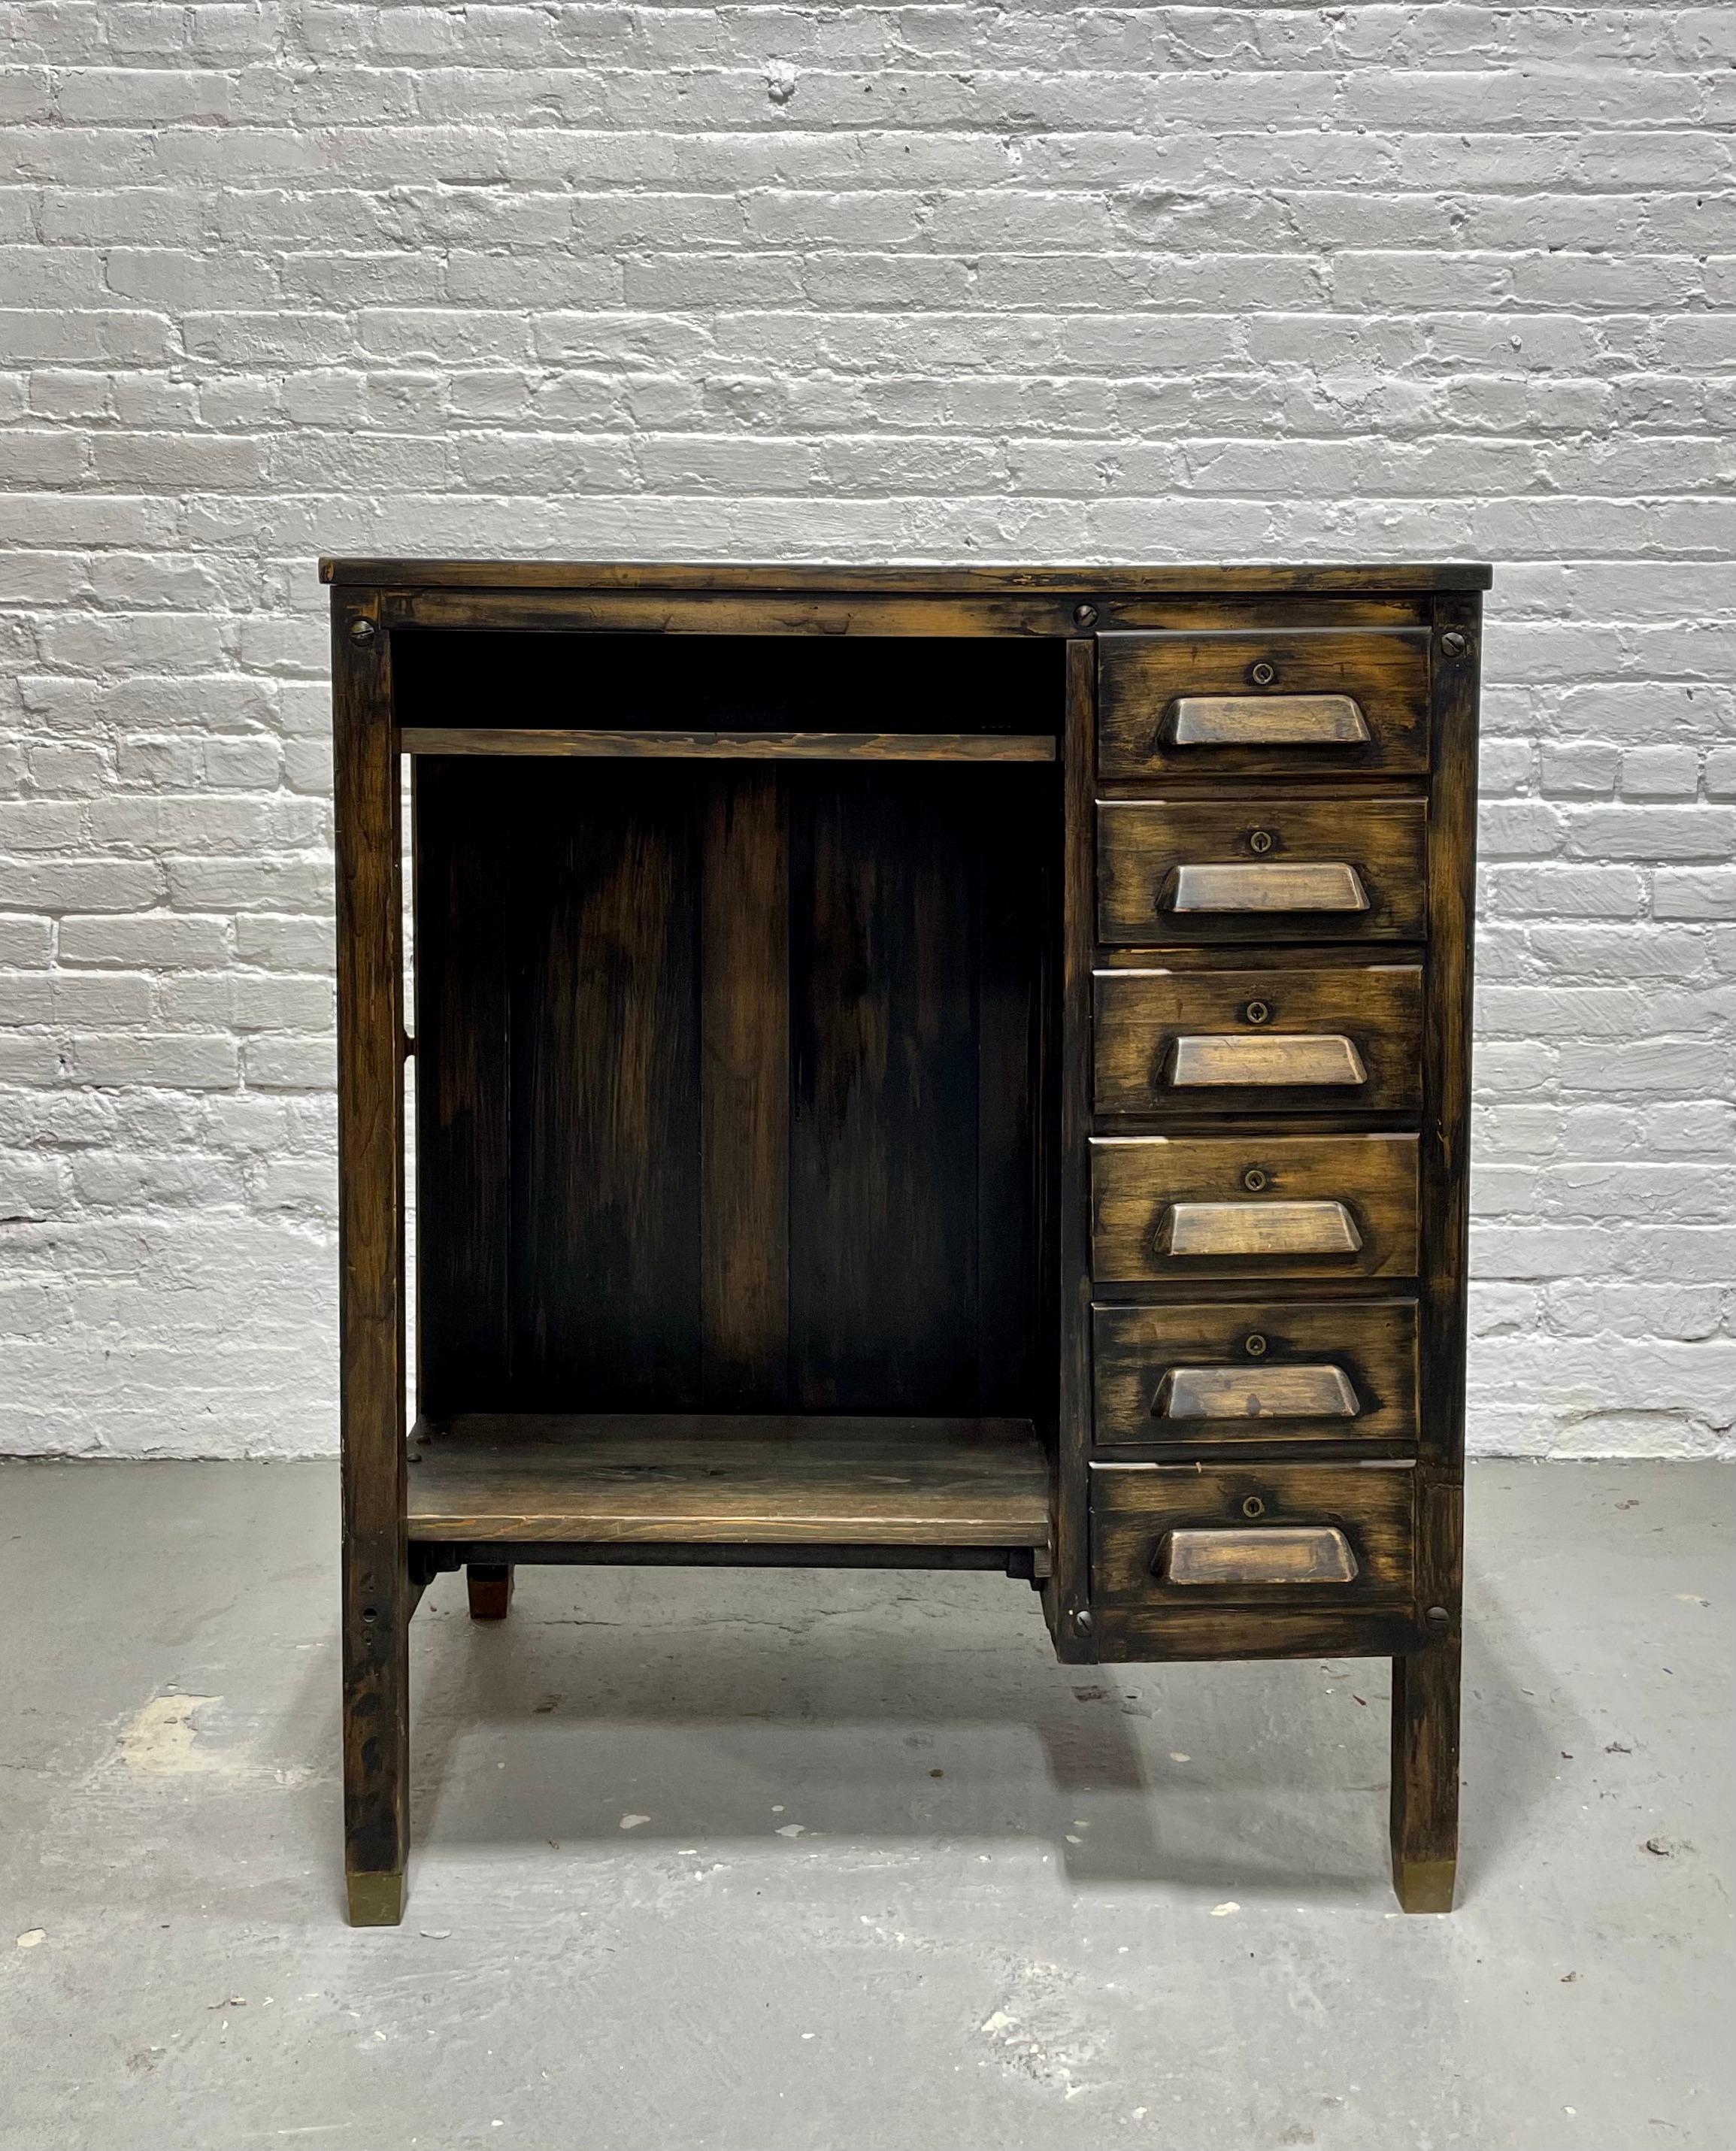 Antique Industrial Wooden Workbench, c. 1920’s. This cabinet features 6 felt lined and dovetailed drawers, a spacious surface area and a side door with additional storage. This piece was likely a Jeweler’s or Watchmaker’s workbench but would make a